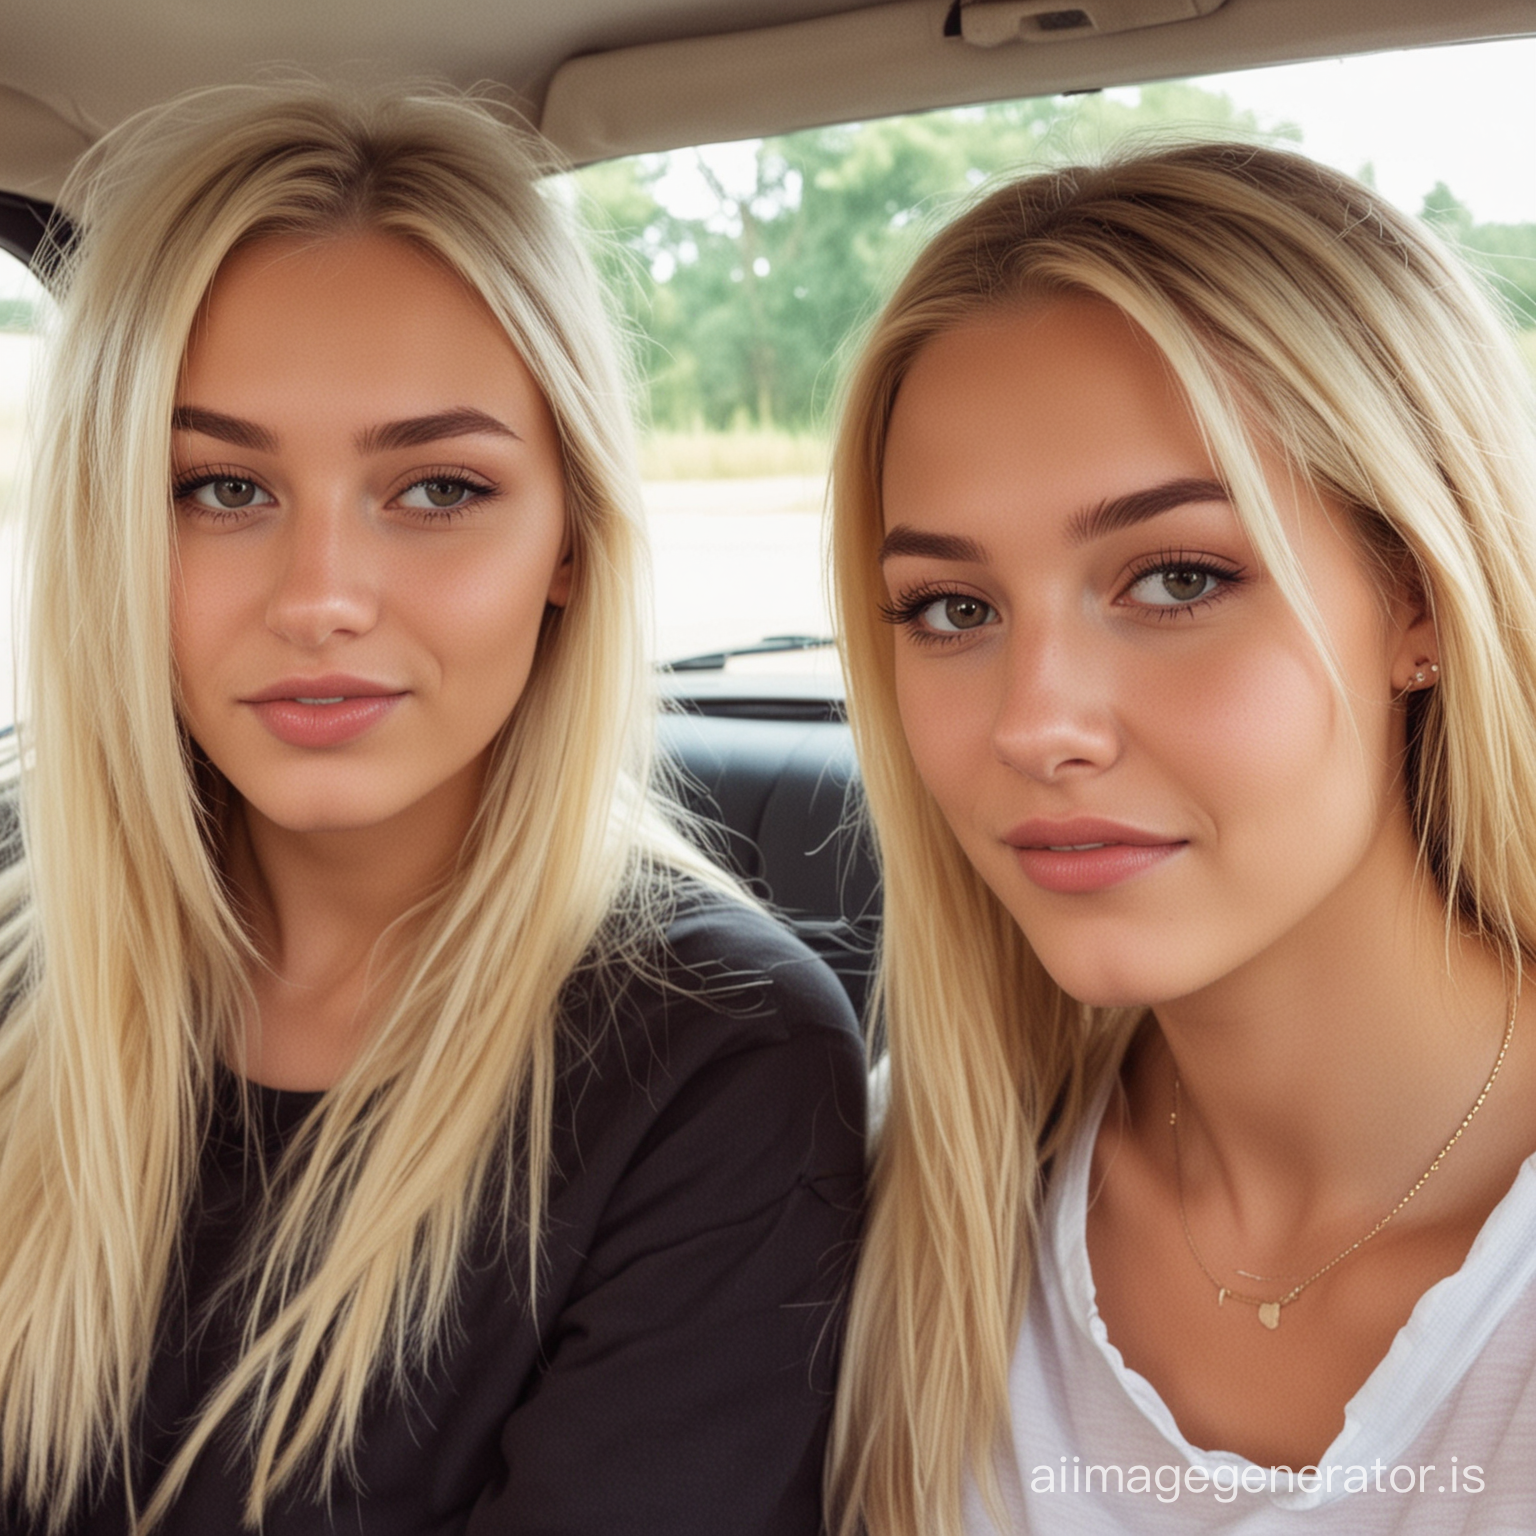 one blonde girl in a car with her burnette friend